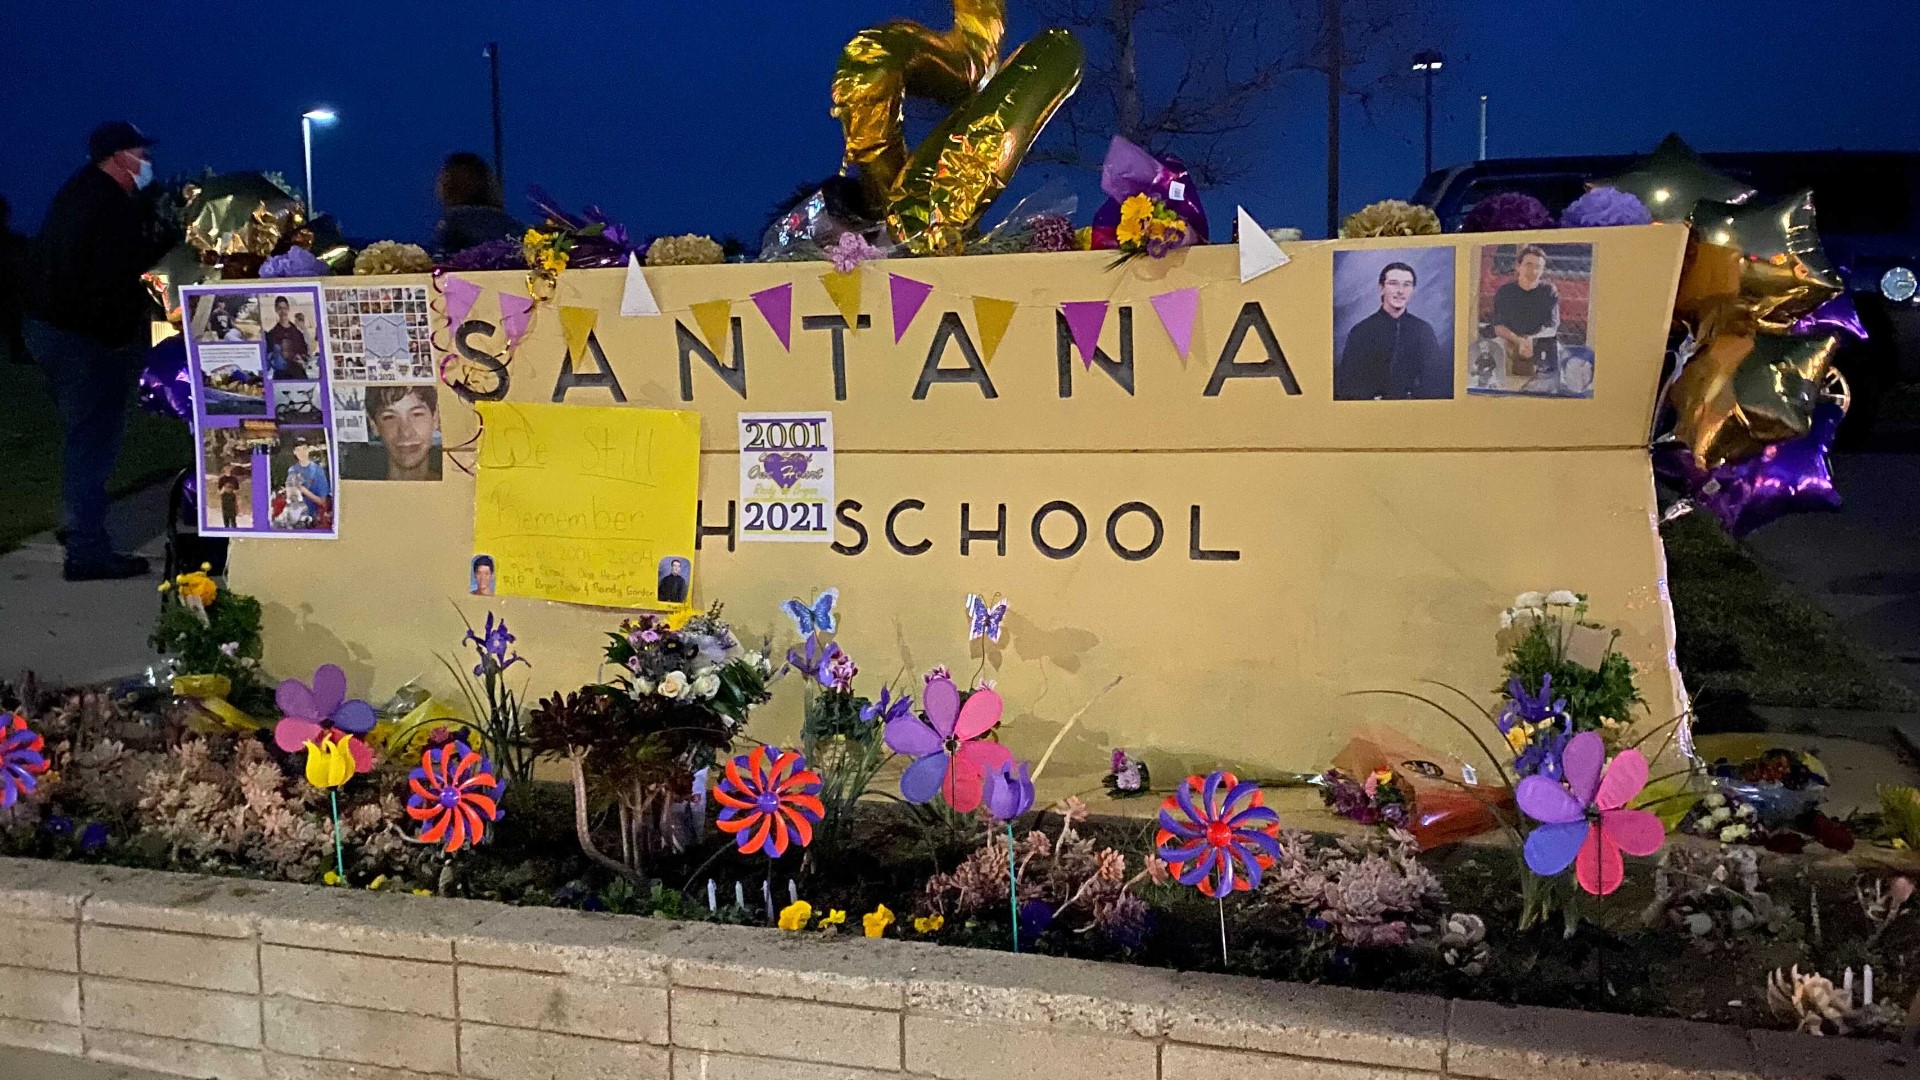 About 100 people attended a vigil outside Santana High School in Santee Friday night to honor the victims and survivors of the deadly 2001 school shooting.